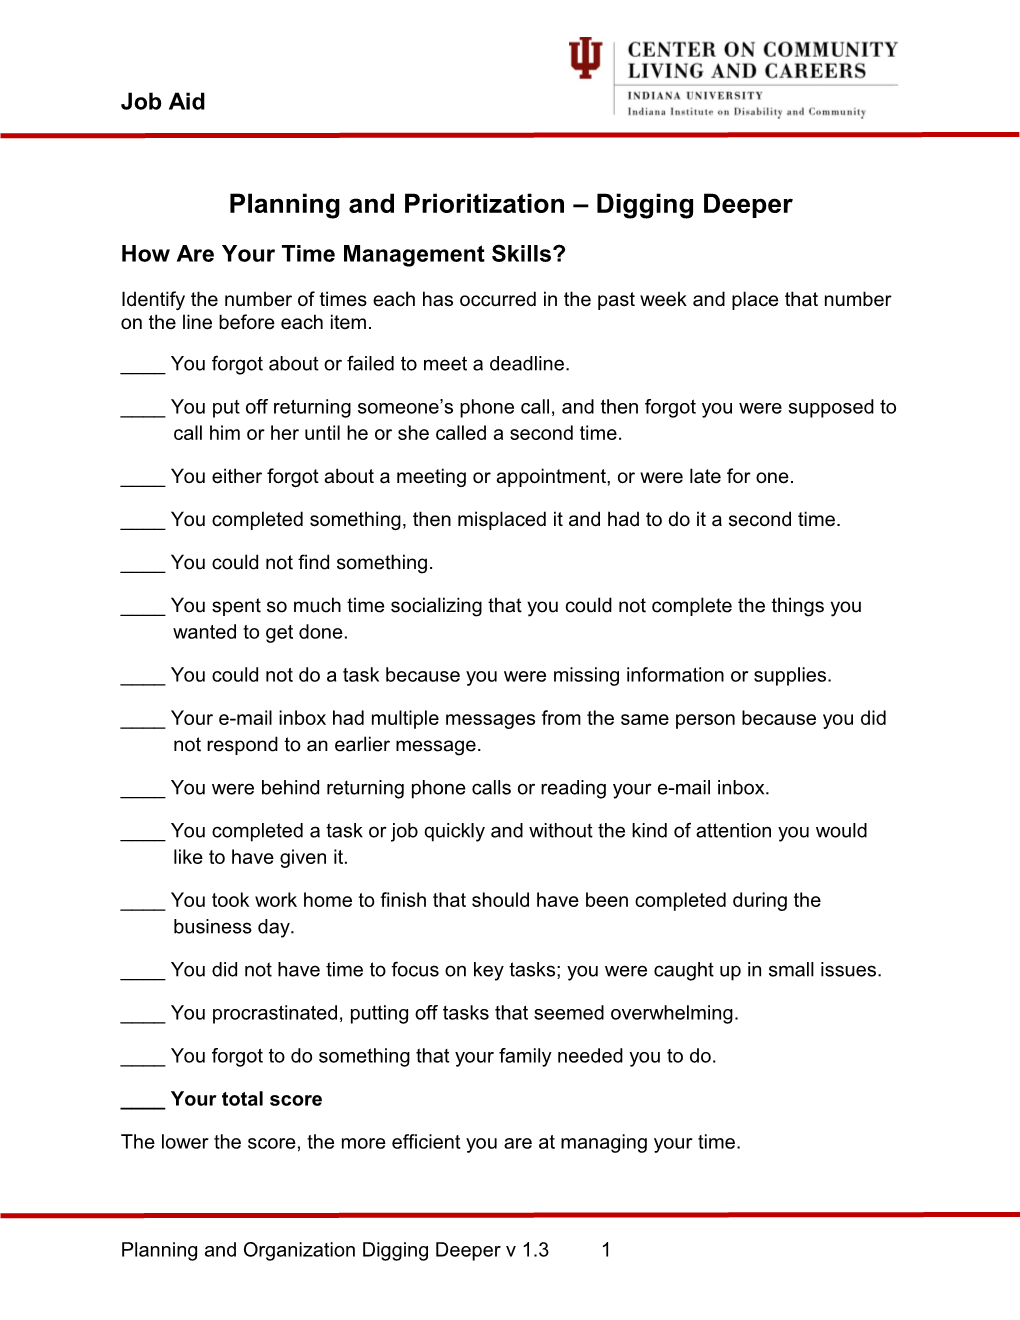 Planning and Prioritization Digging Deeper